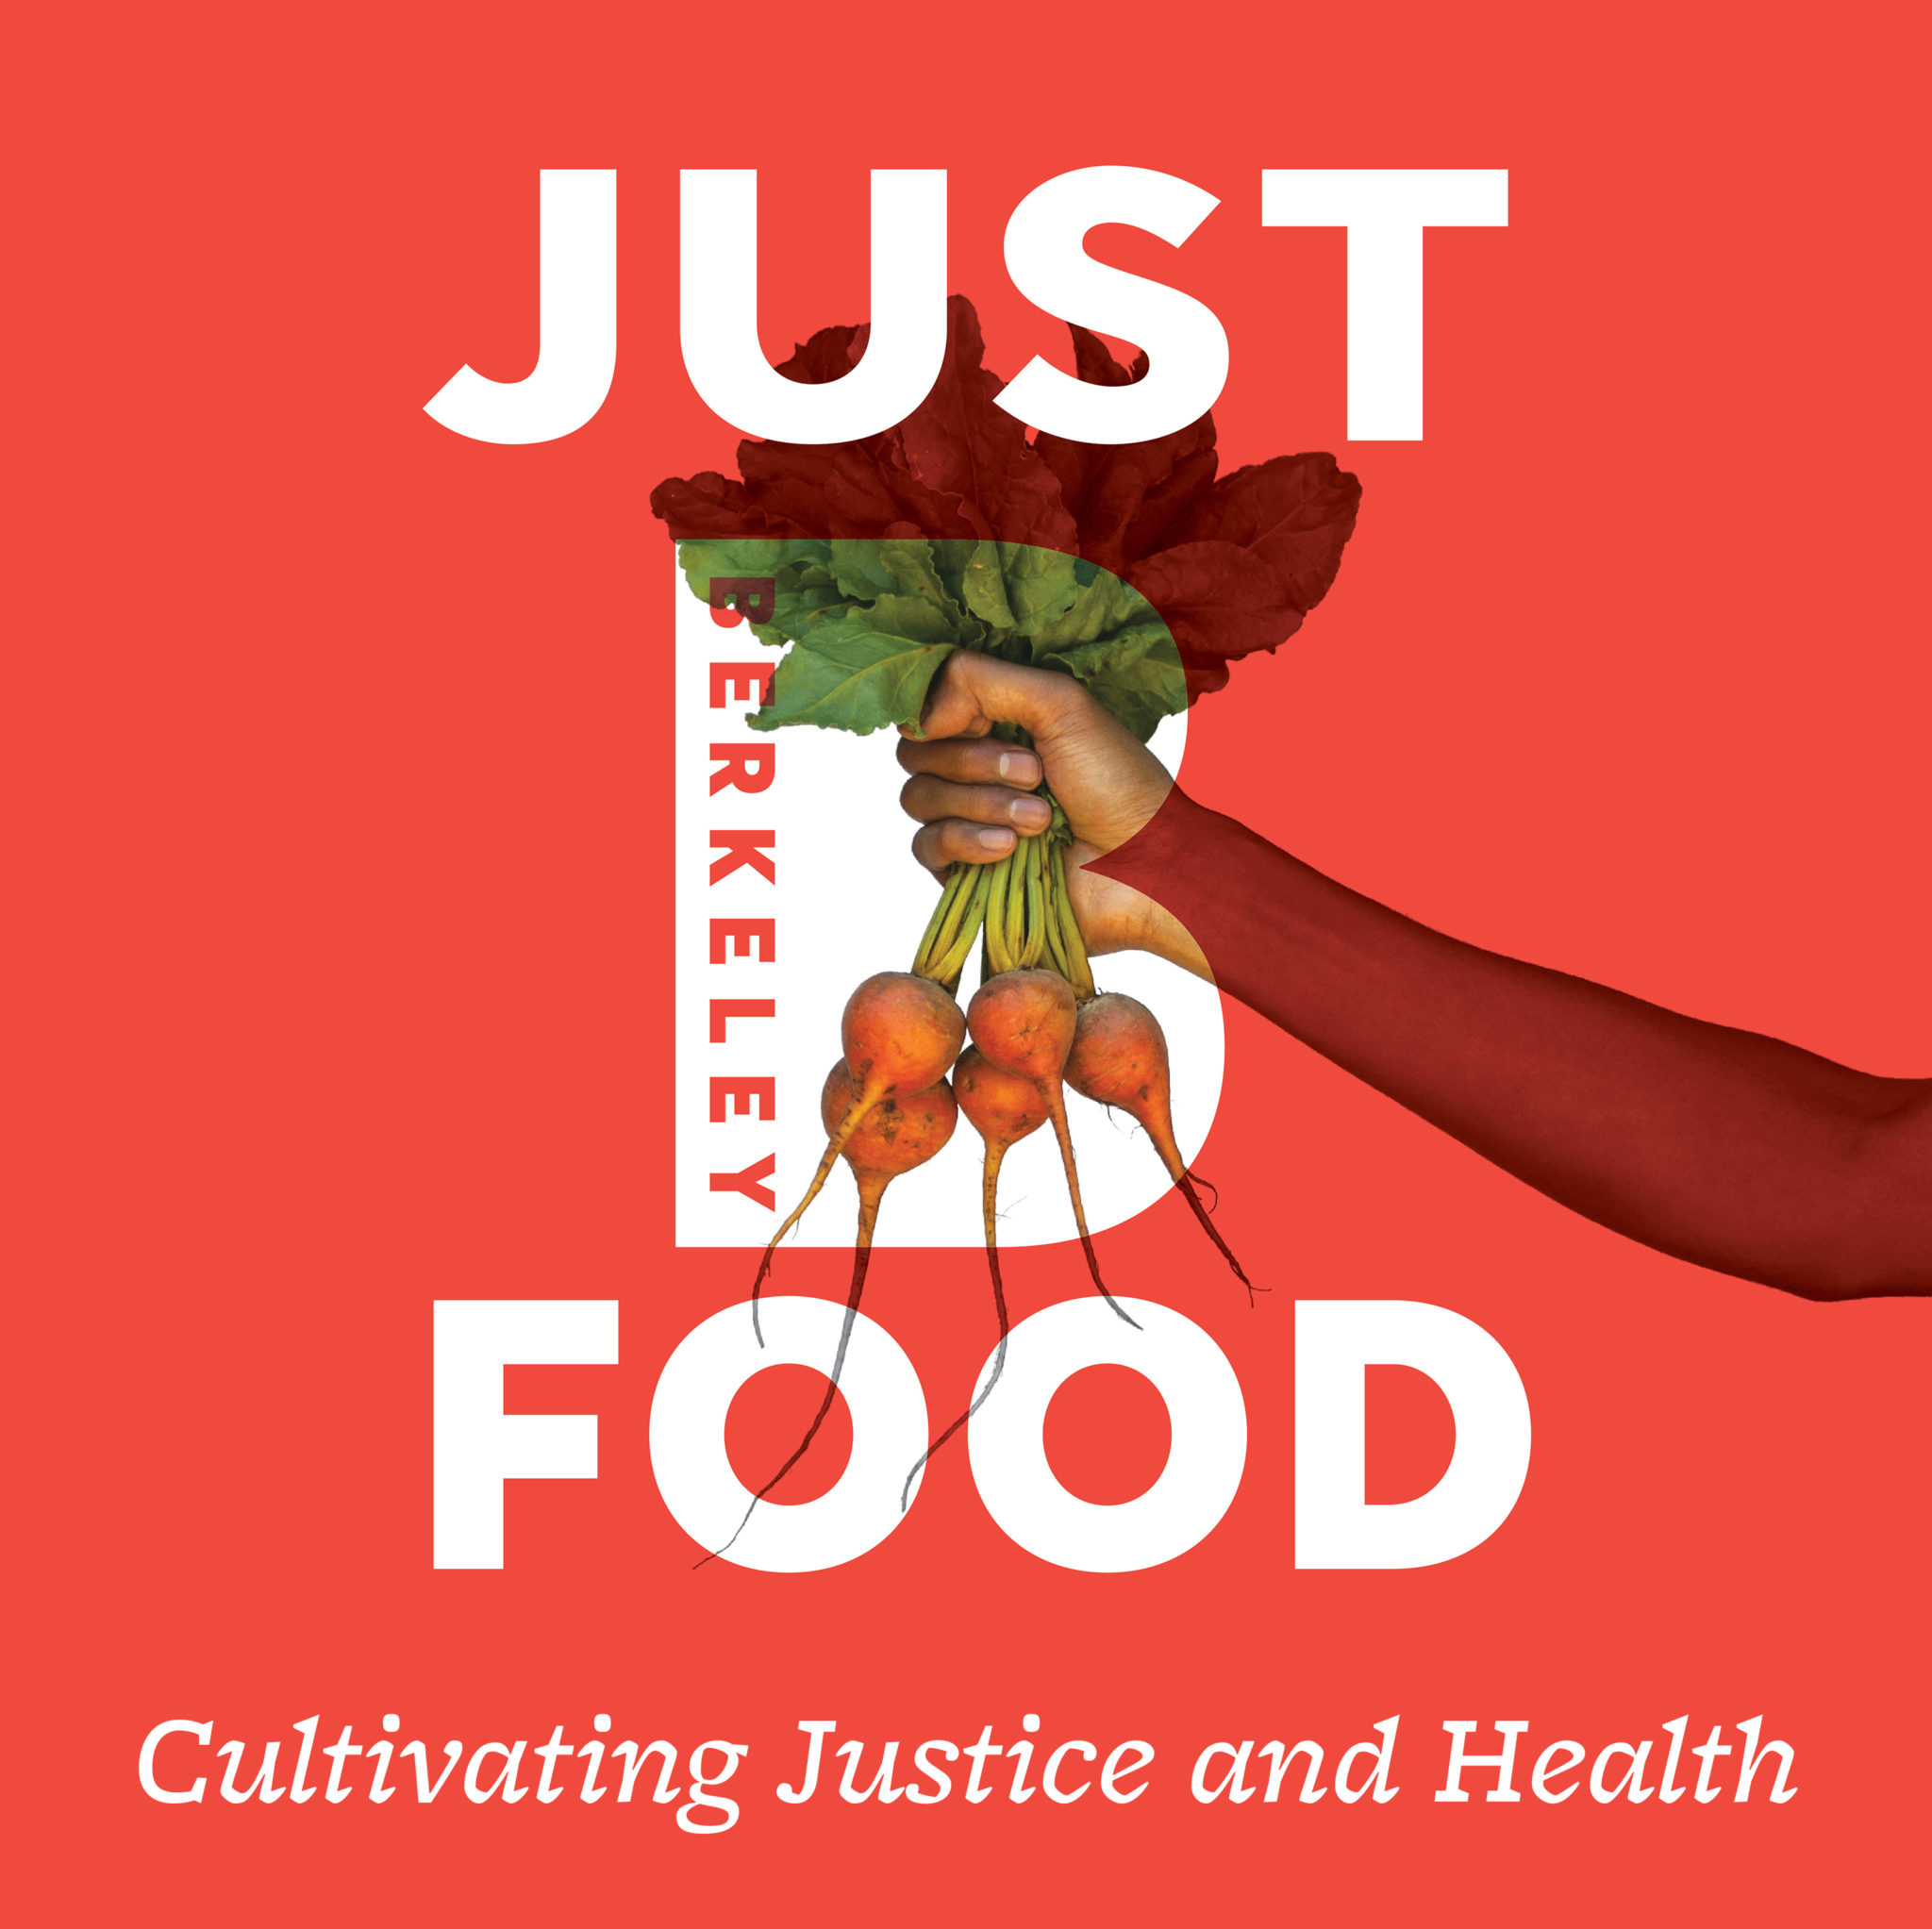 JUST FOOD podcast logo with tagline